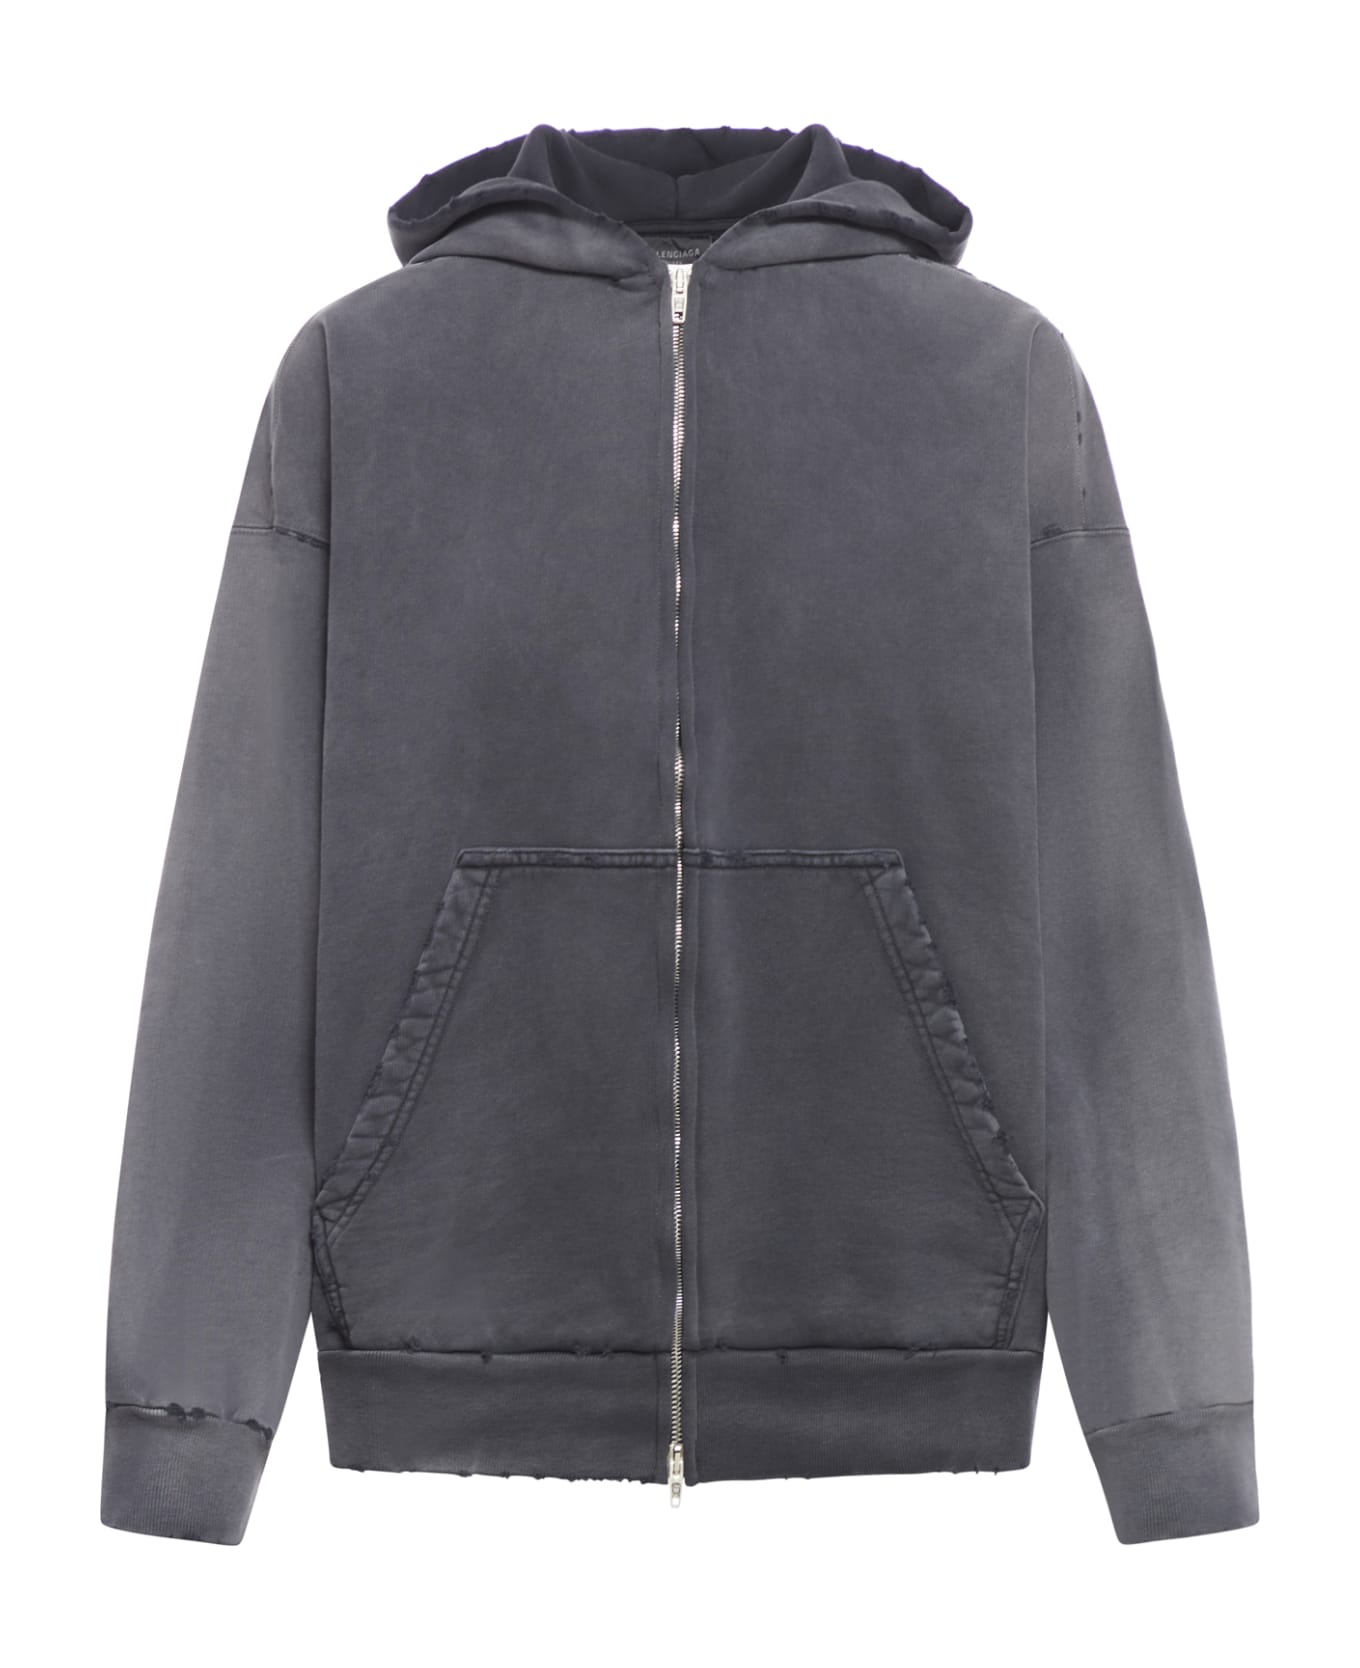 Balenciaga Zip-up Hoodie Not Been Done Archetype Moll - Washed Out Black